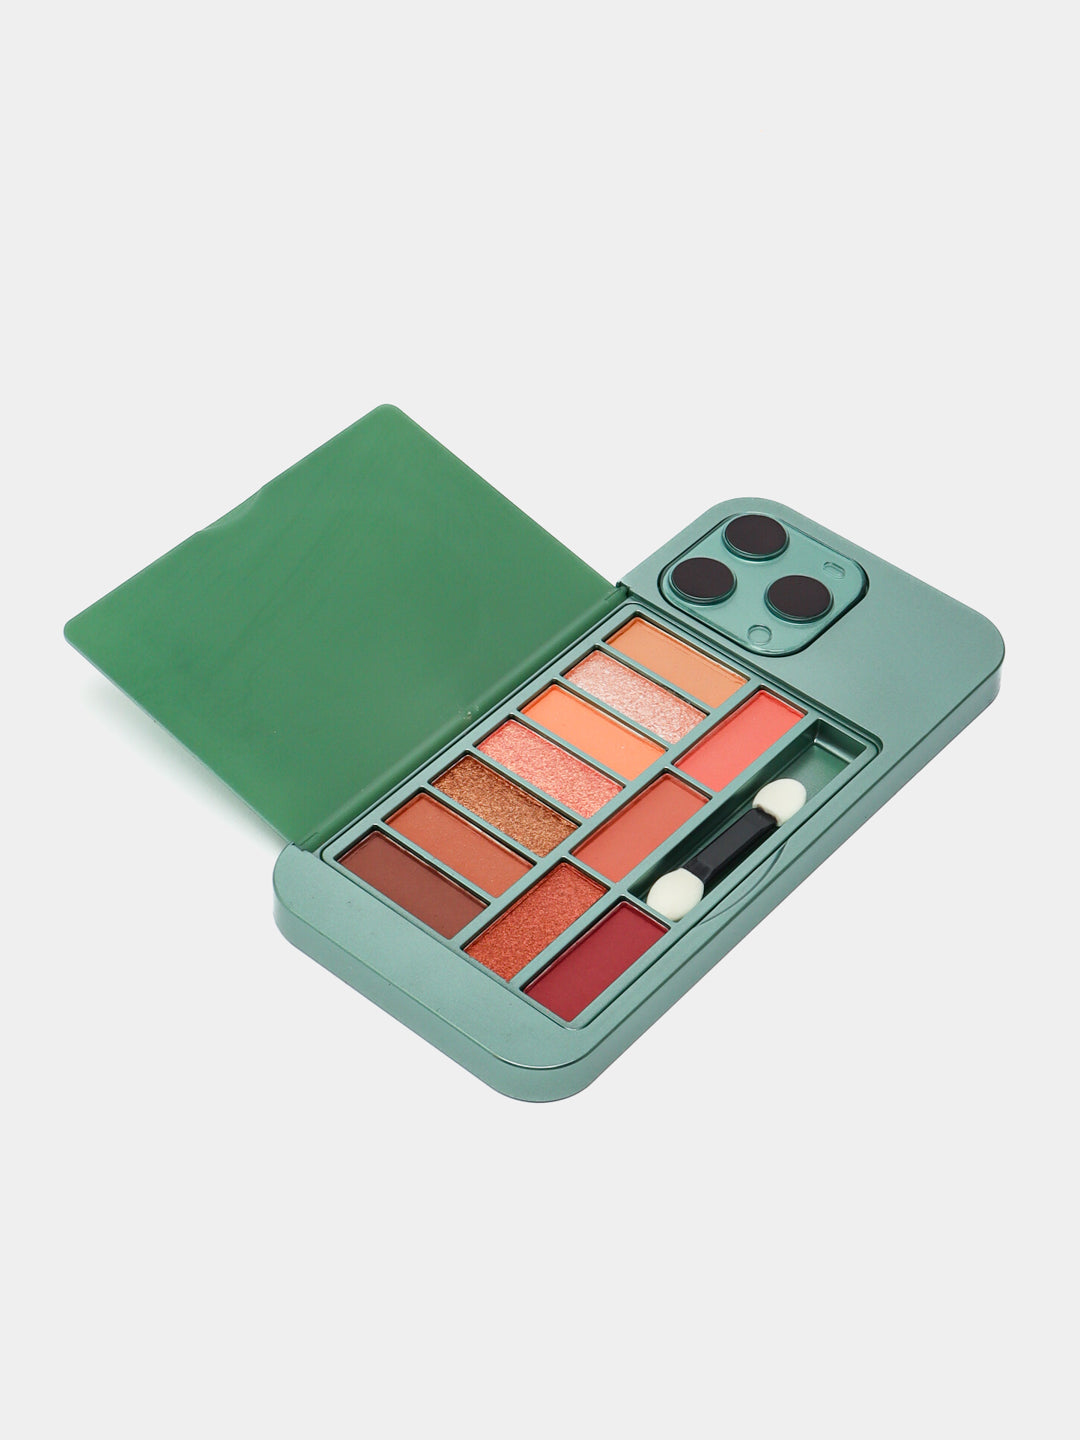 Iphone Shape Beauty Makeup Kit | Long Lasting Brightening Complexion And Highlight Blush Palette With Mirror Back (random Colors)